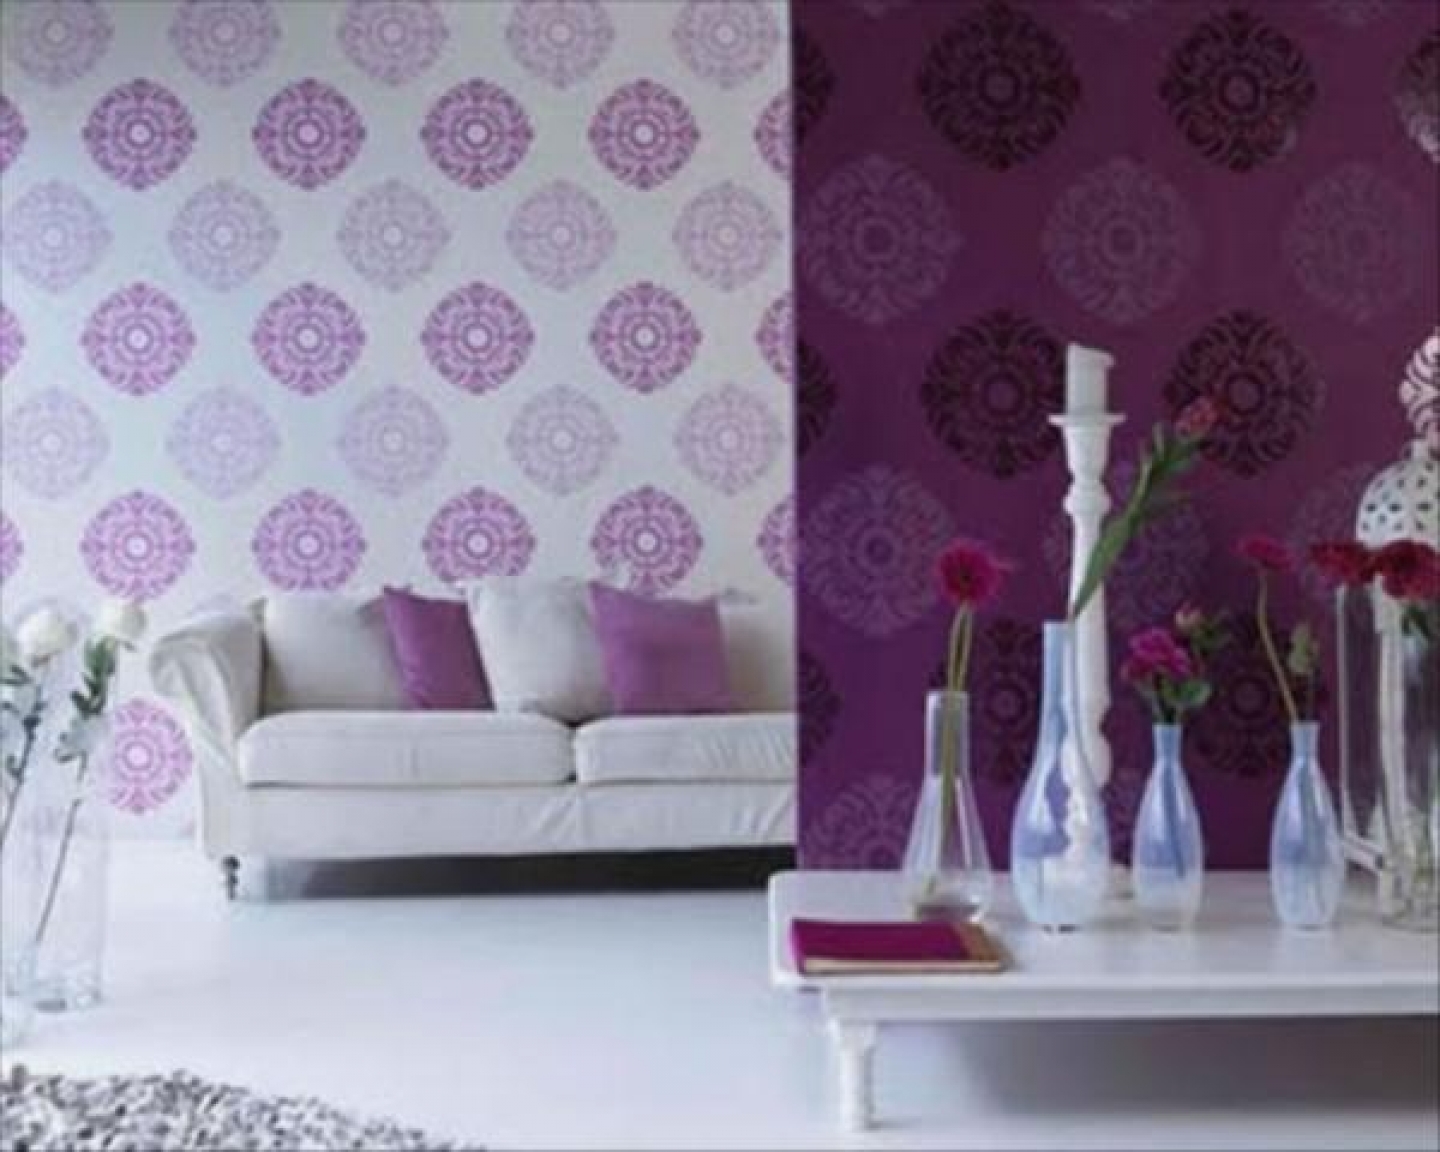 tags decor decorating decorating ideas floral wallpaper houses